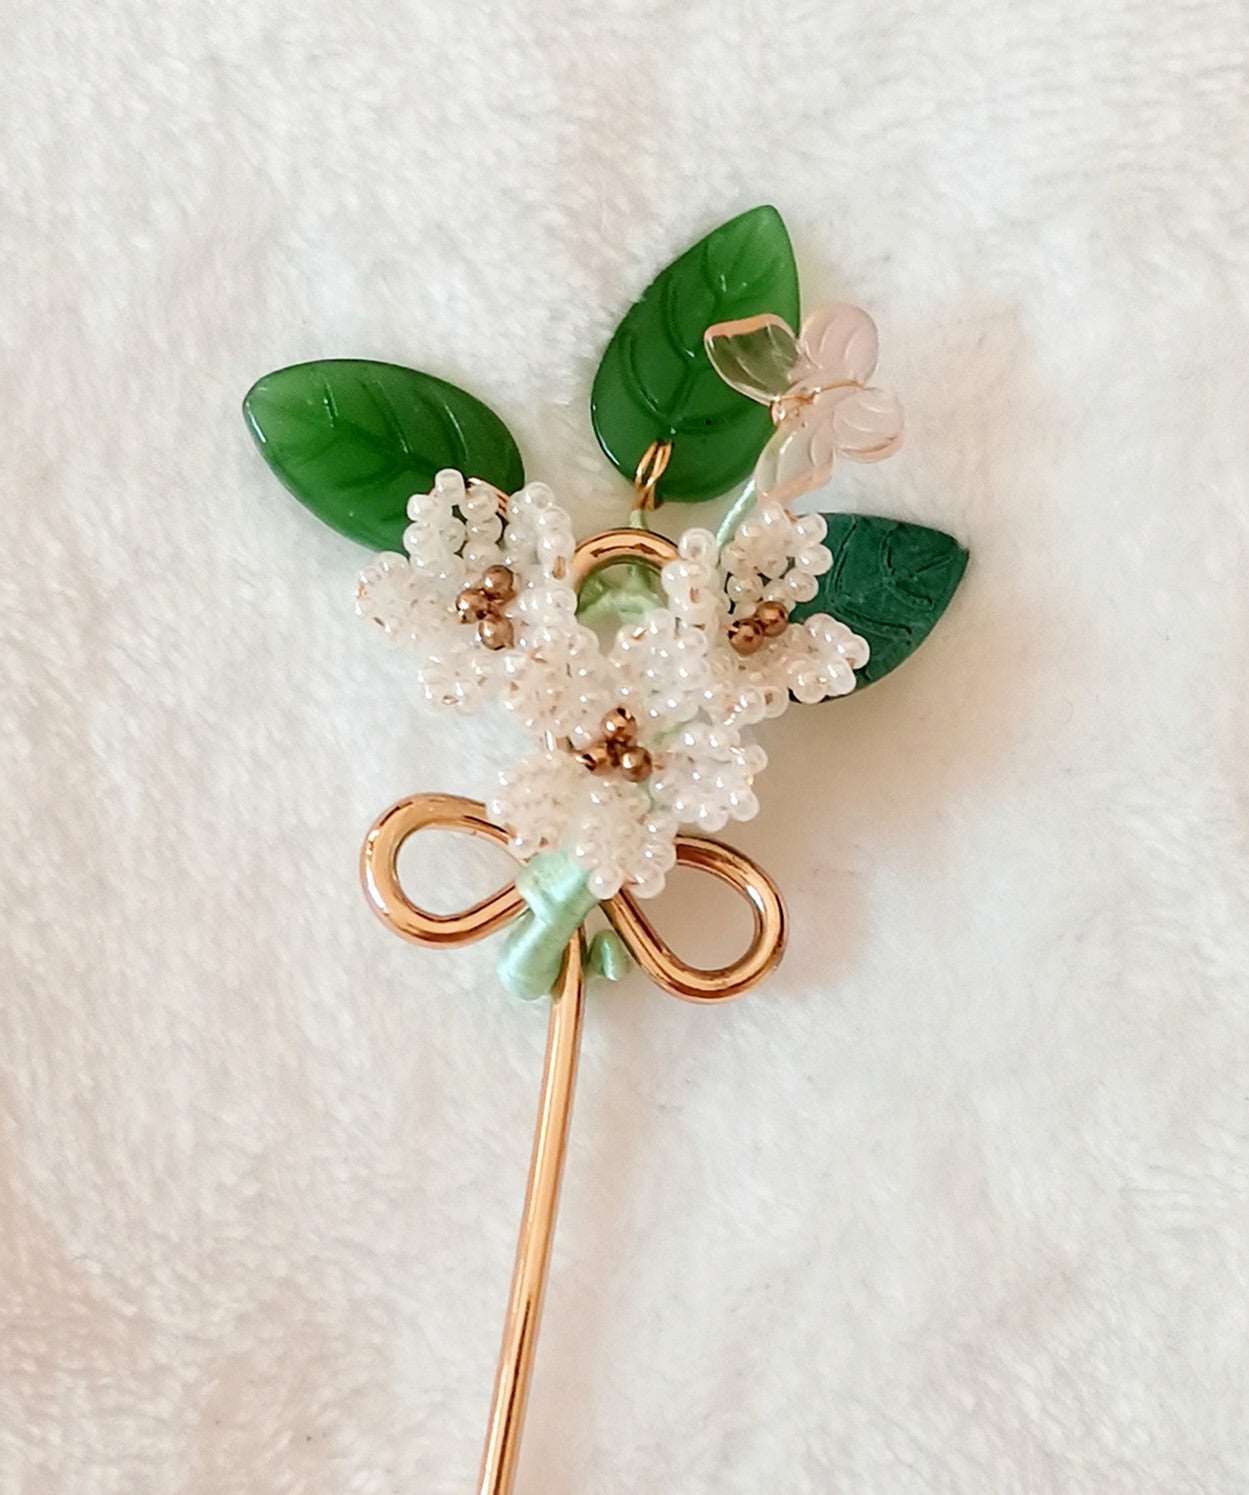 Traditional handmade hairpins with modern twists